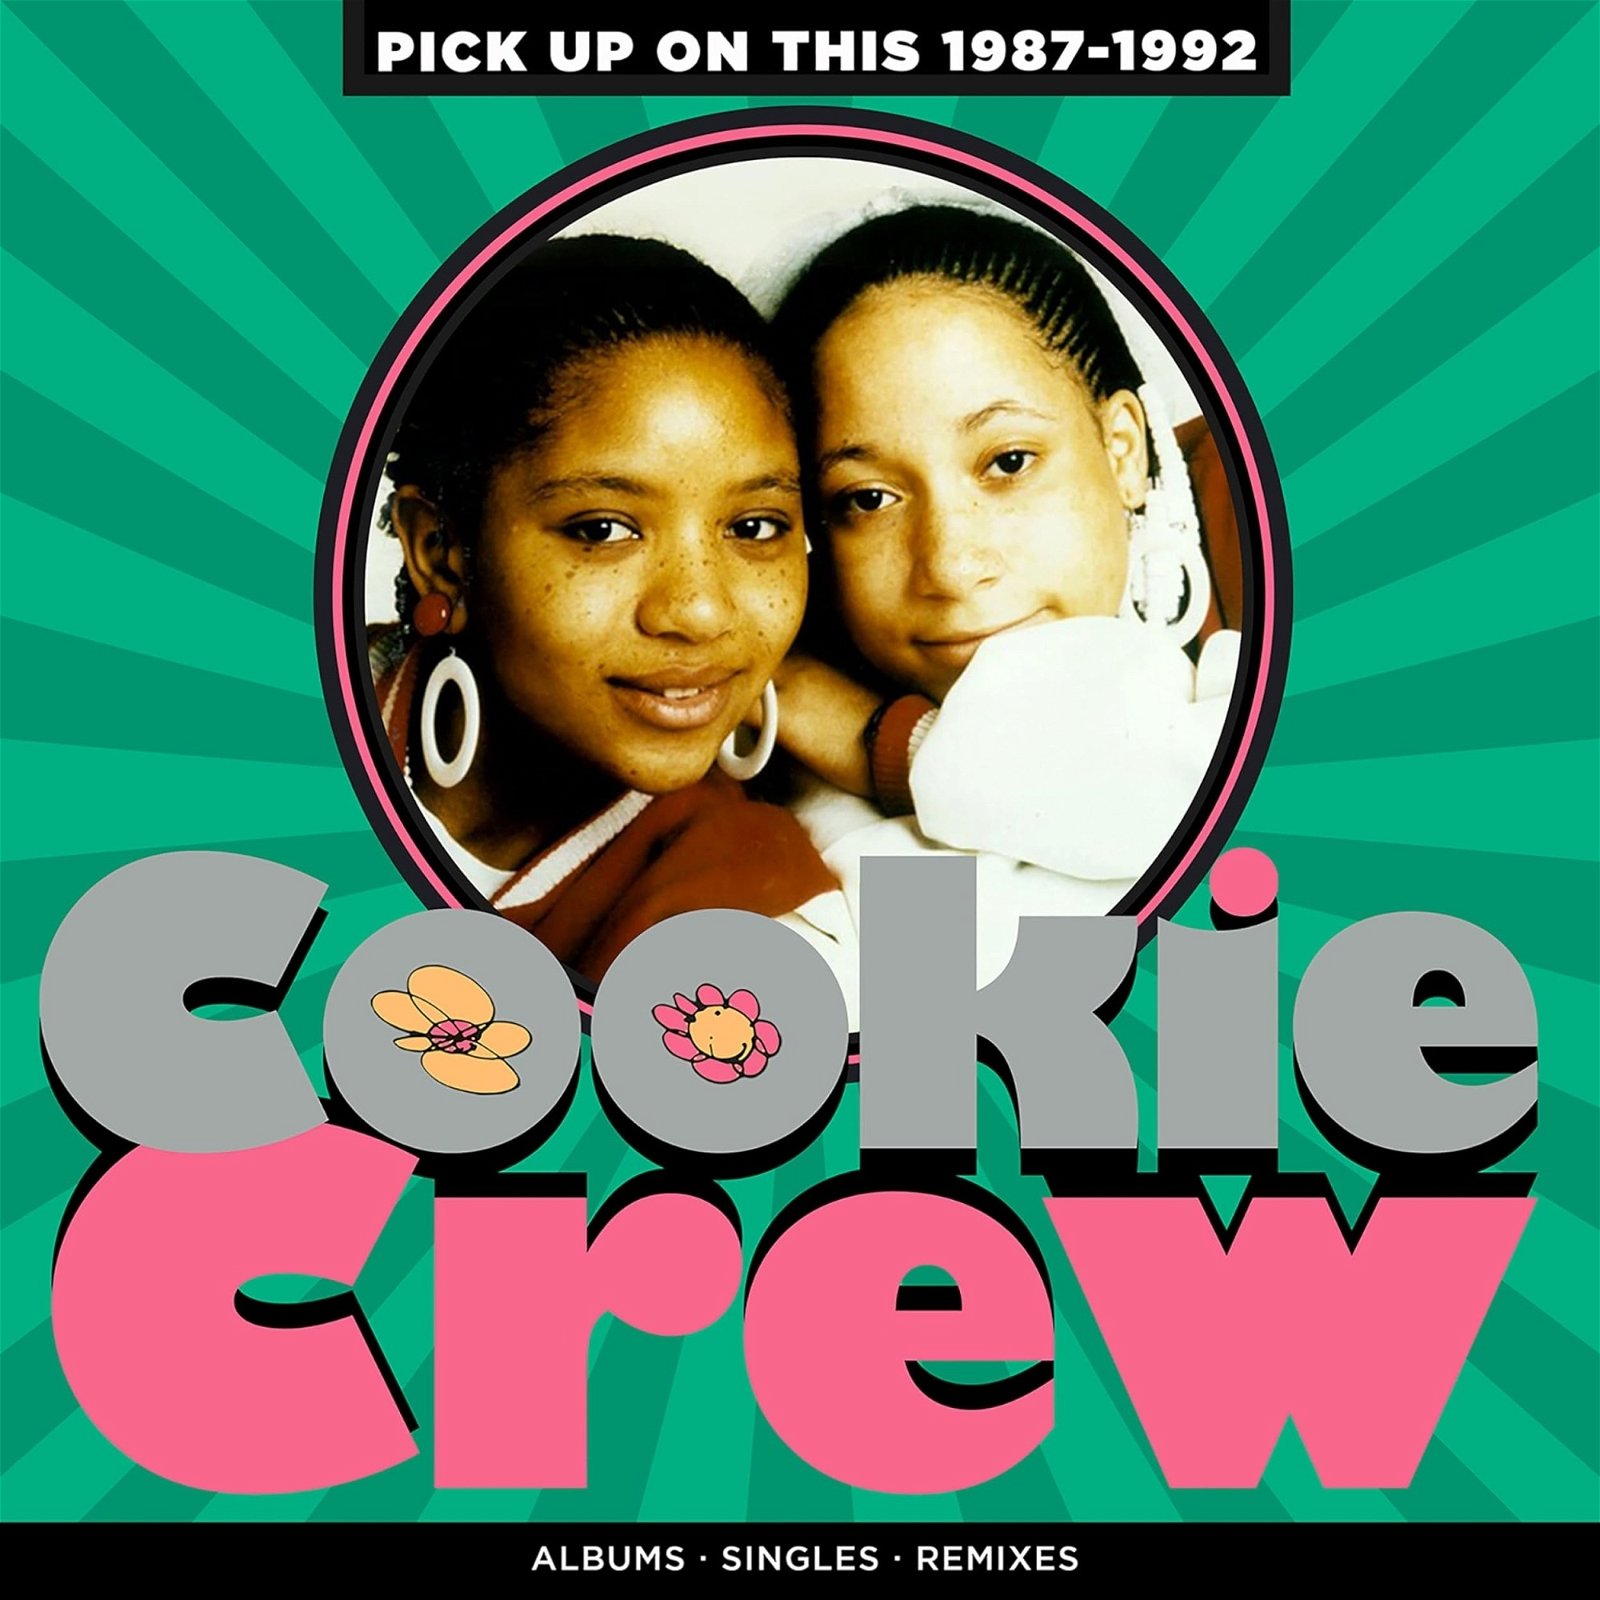 CD Shop - COOKIE CREW PICK UP ON THIS - 1987-1992